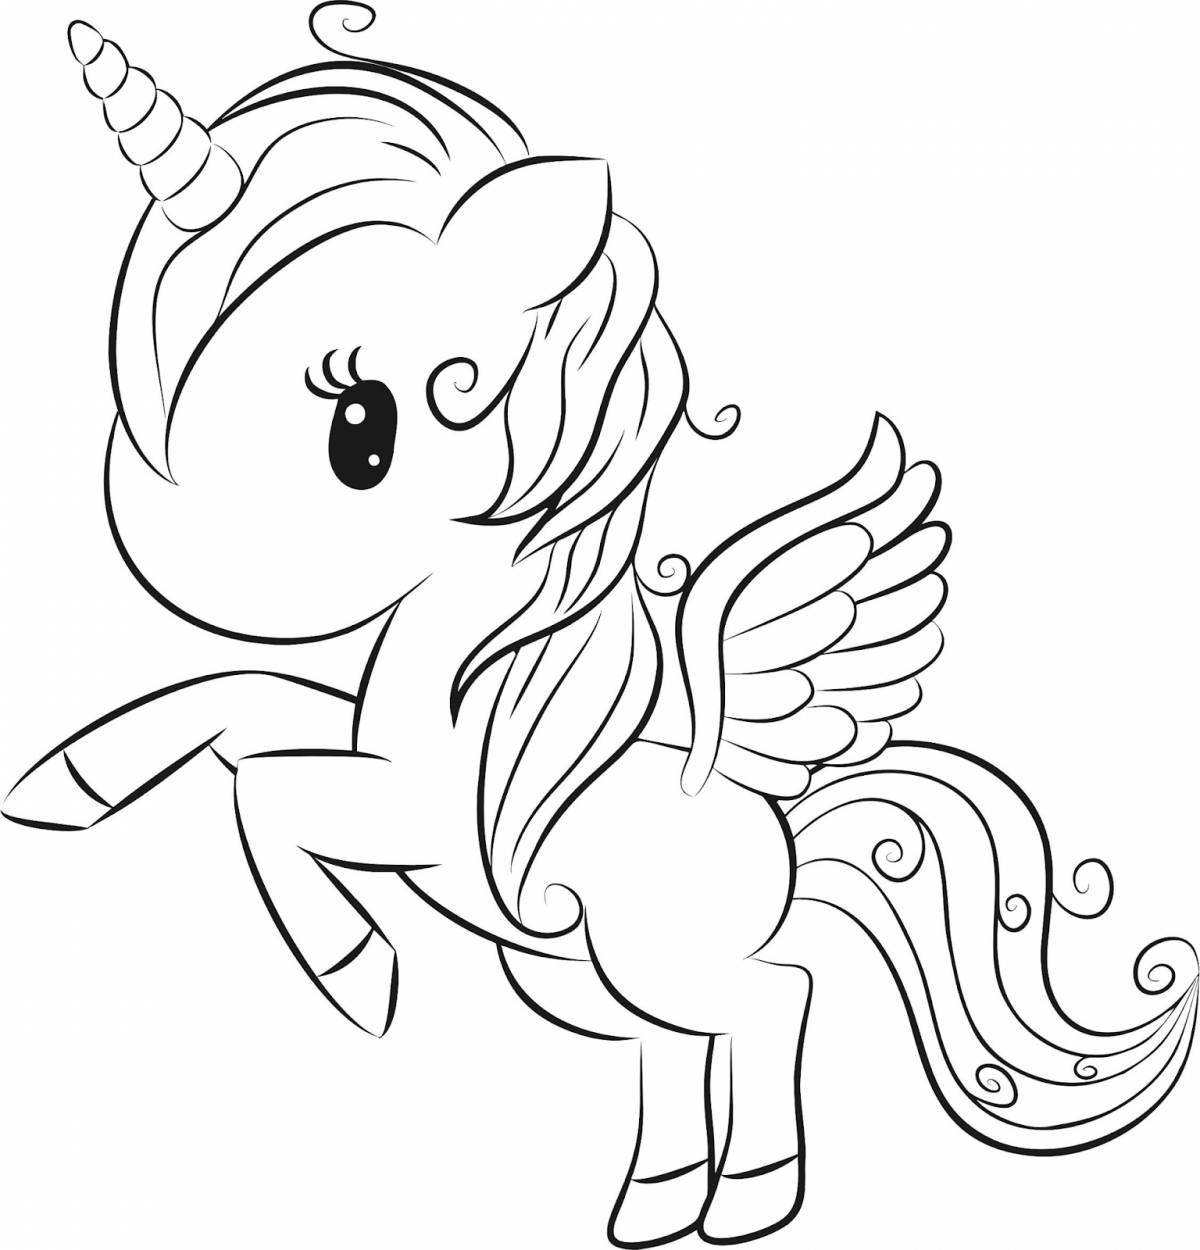 Unicorn coloring page for girls #19